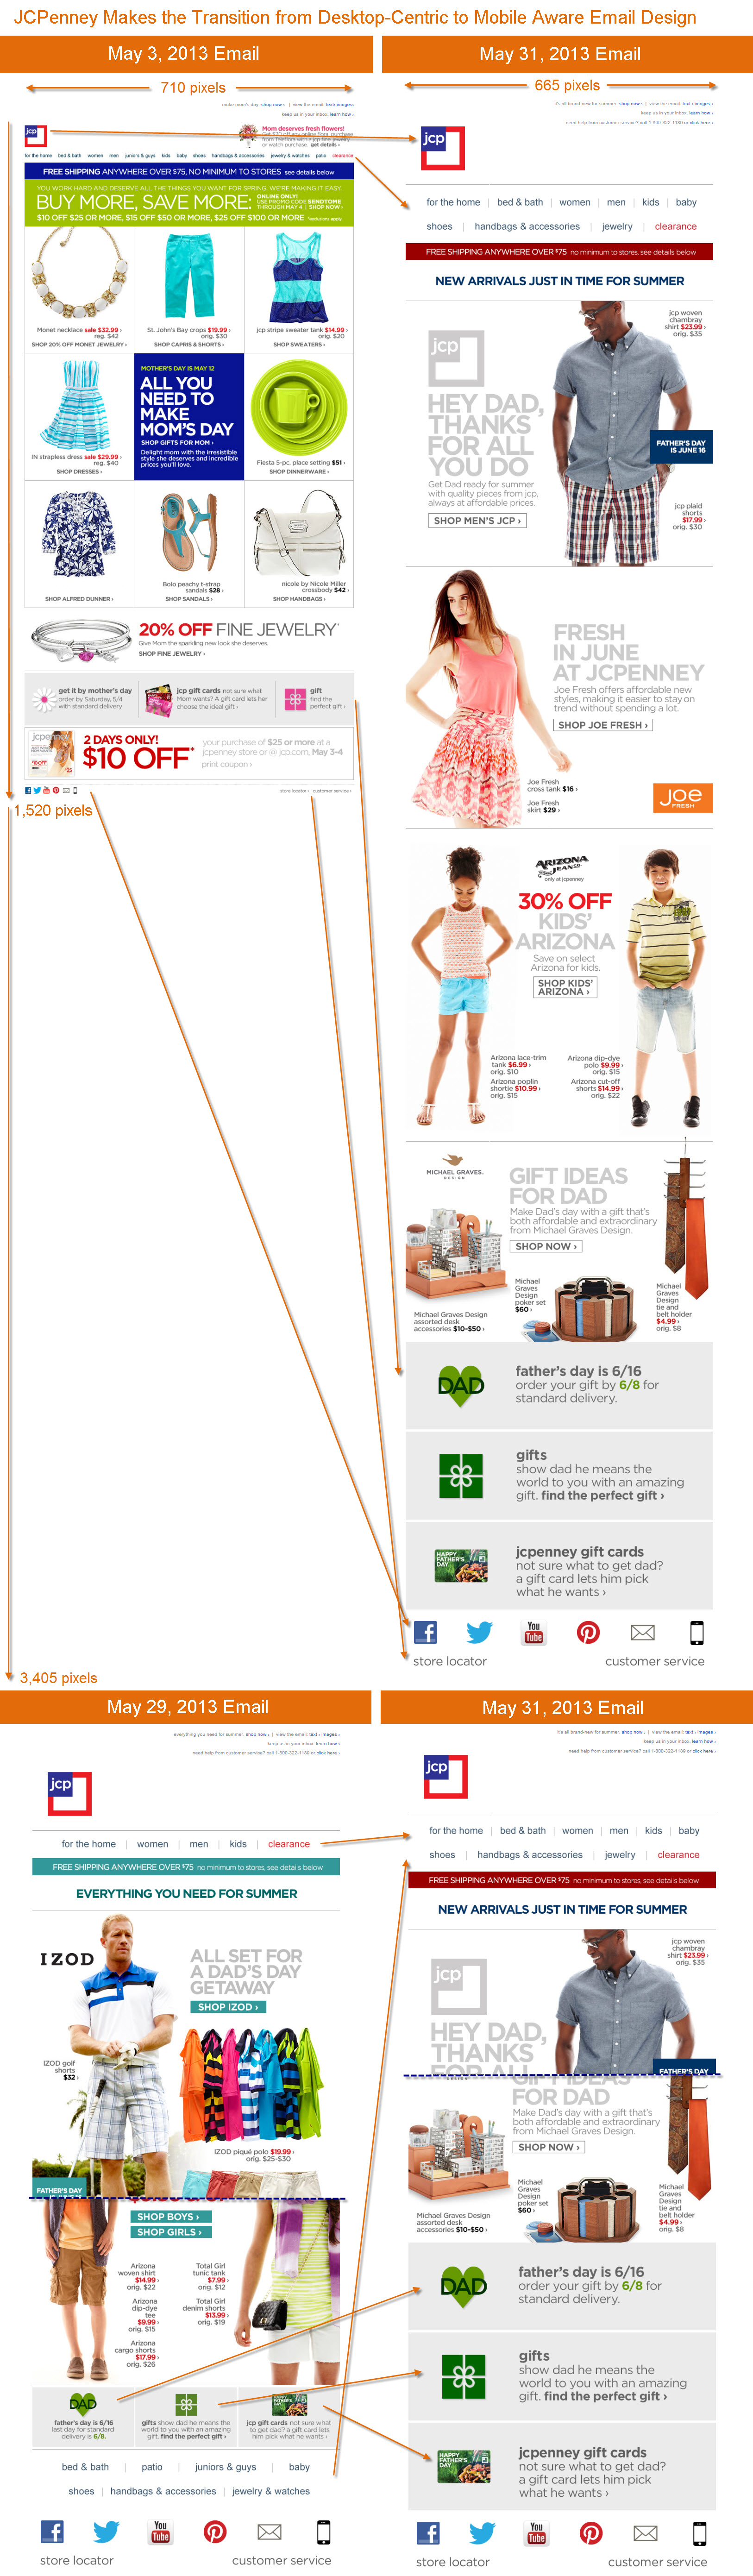 JCPenneyâ€™s Mobile Aware Email Makeover - Email Marketing Rules